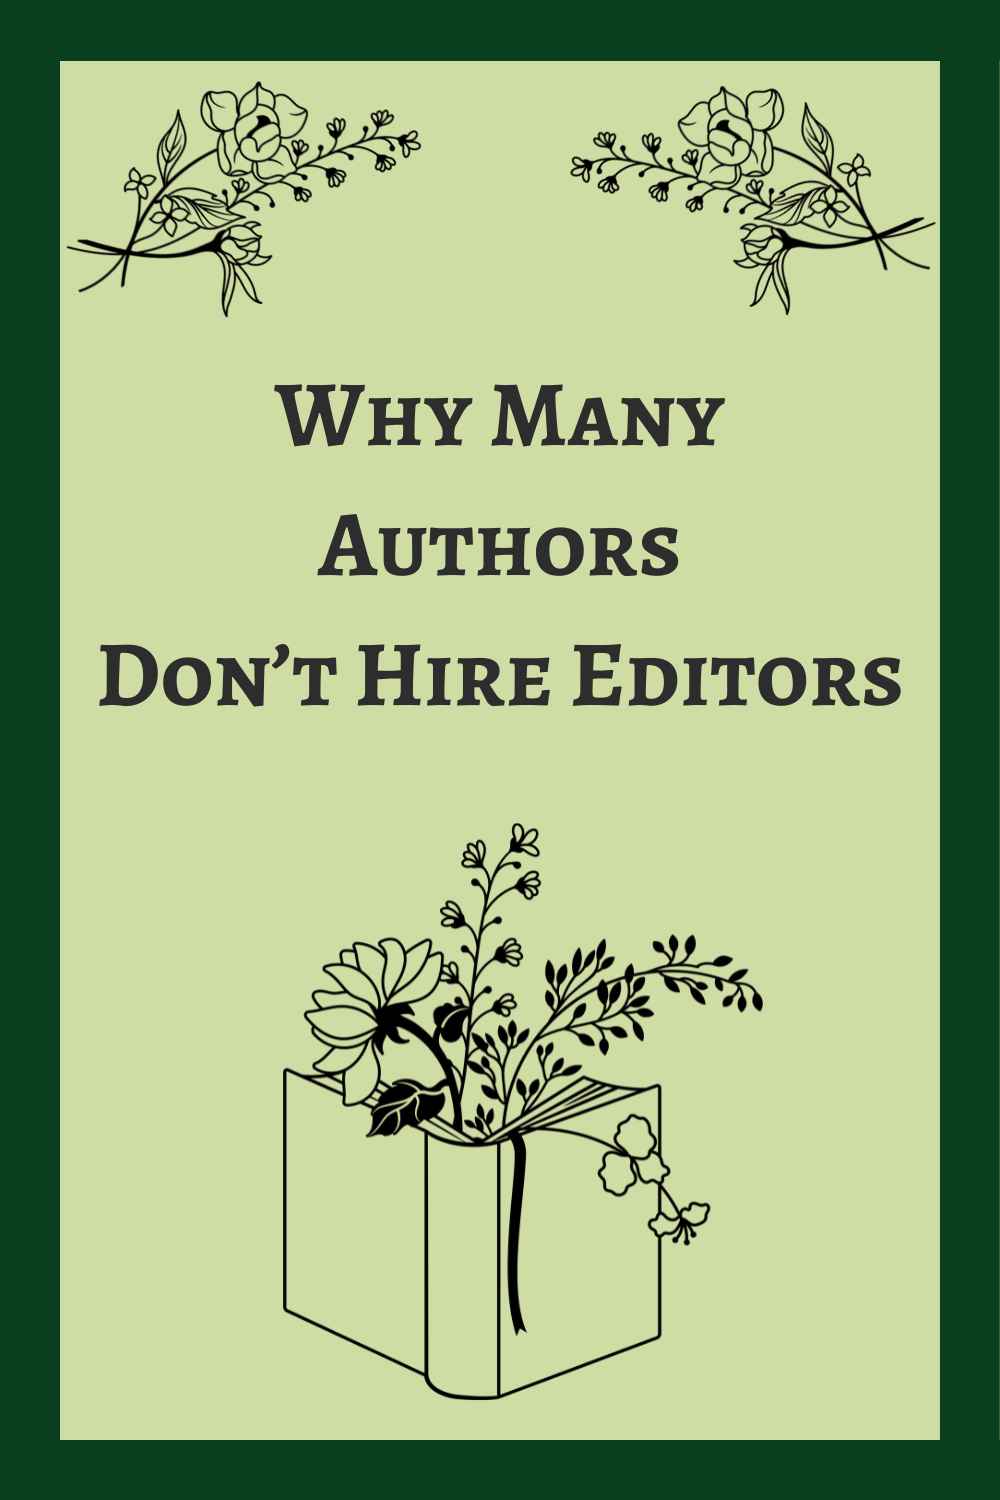 Ever wonder why many authors don't hire editors? Check out this article on The Picky Bookworm!